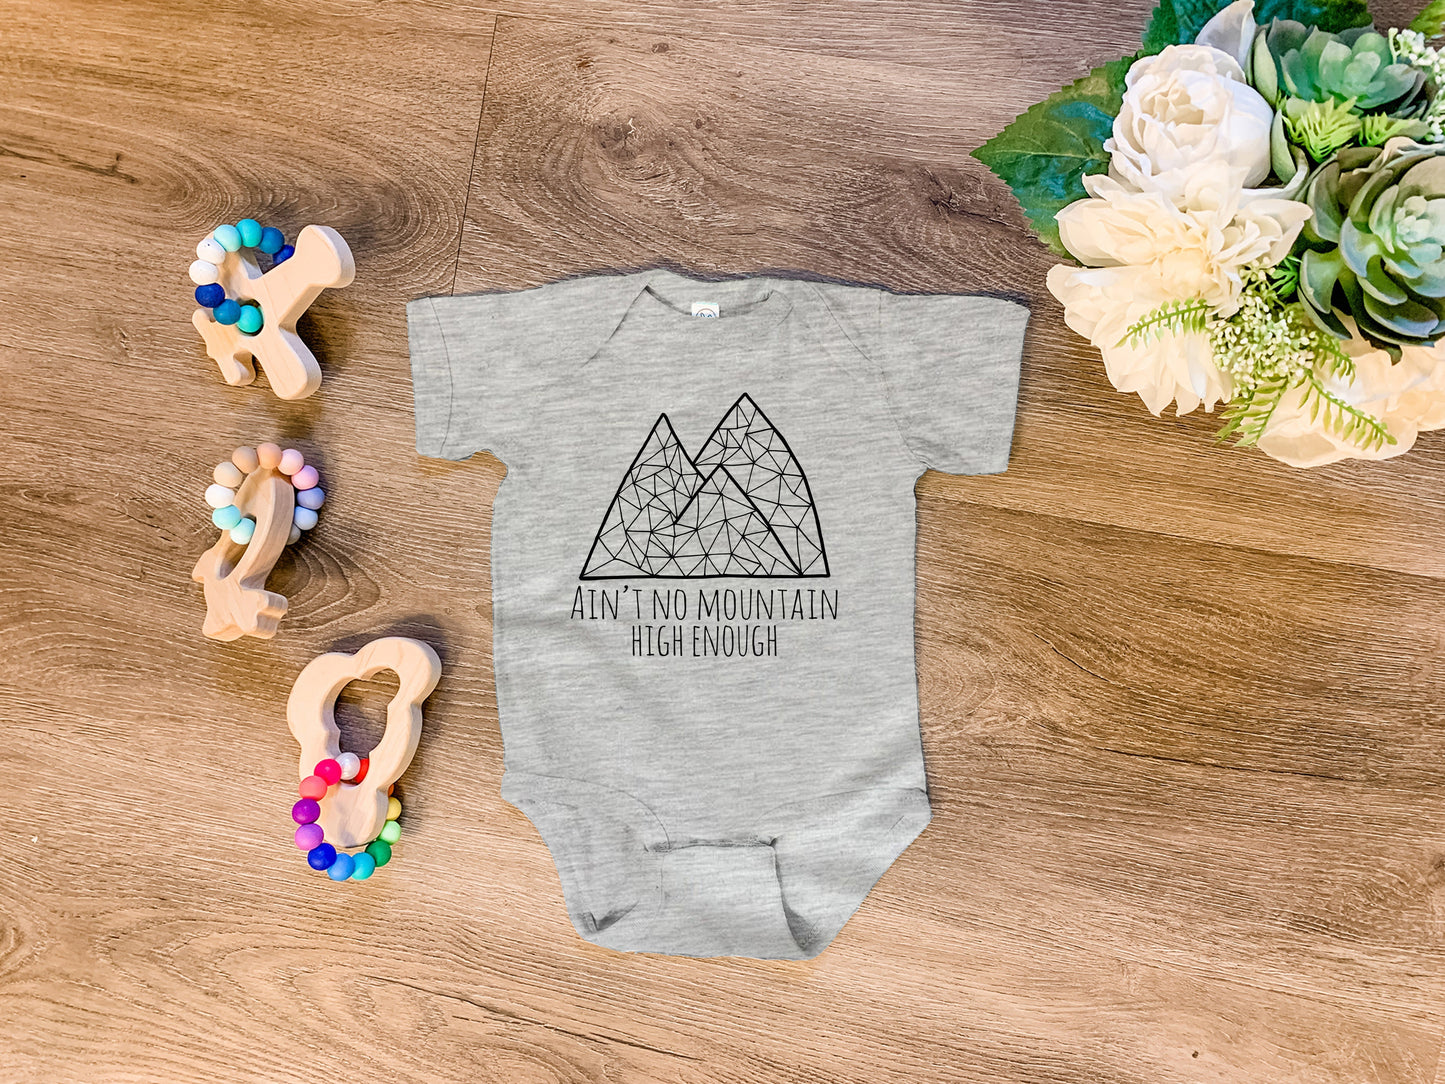 Ain't No Mountain High Enough - Onesie - Heather Gray, Chill, or Lavender